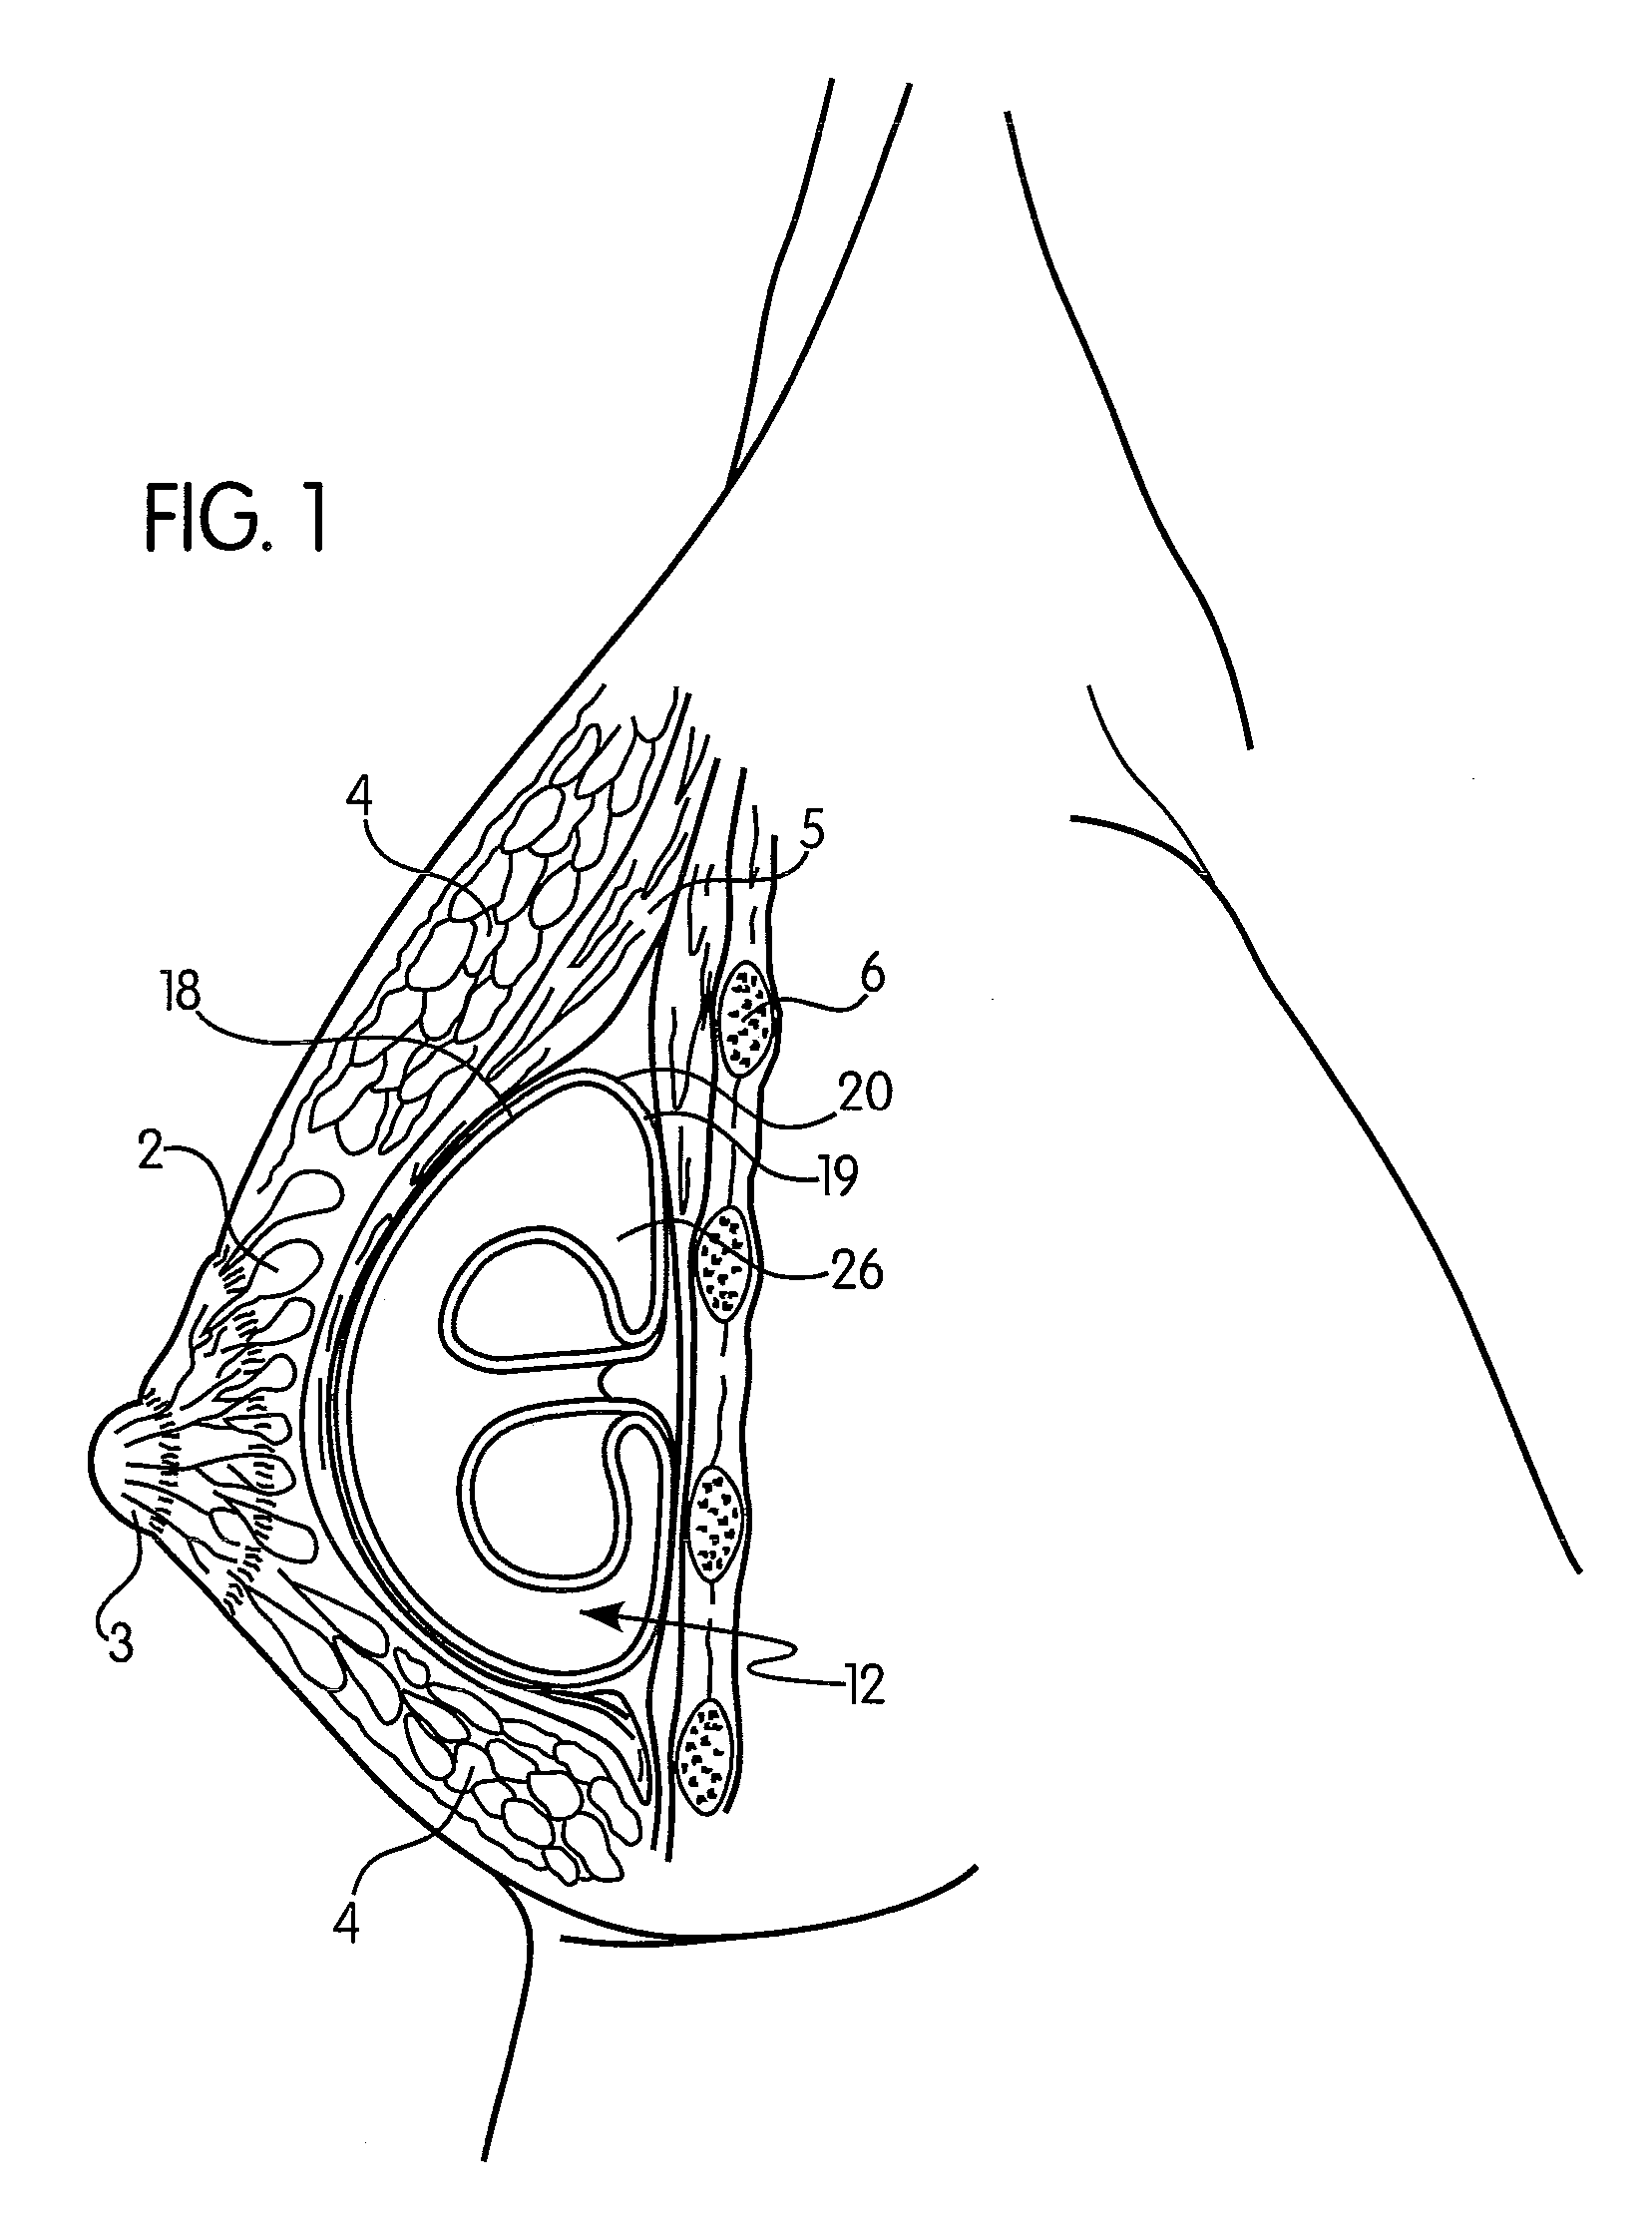 Adjustable implant with self-sealing elastomeric membrane and methods of fabrication thereof